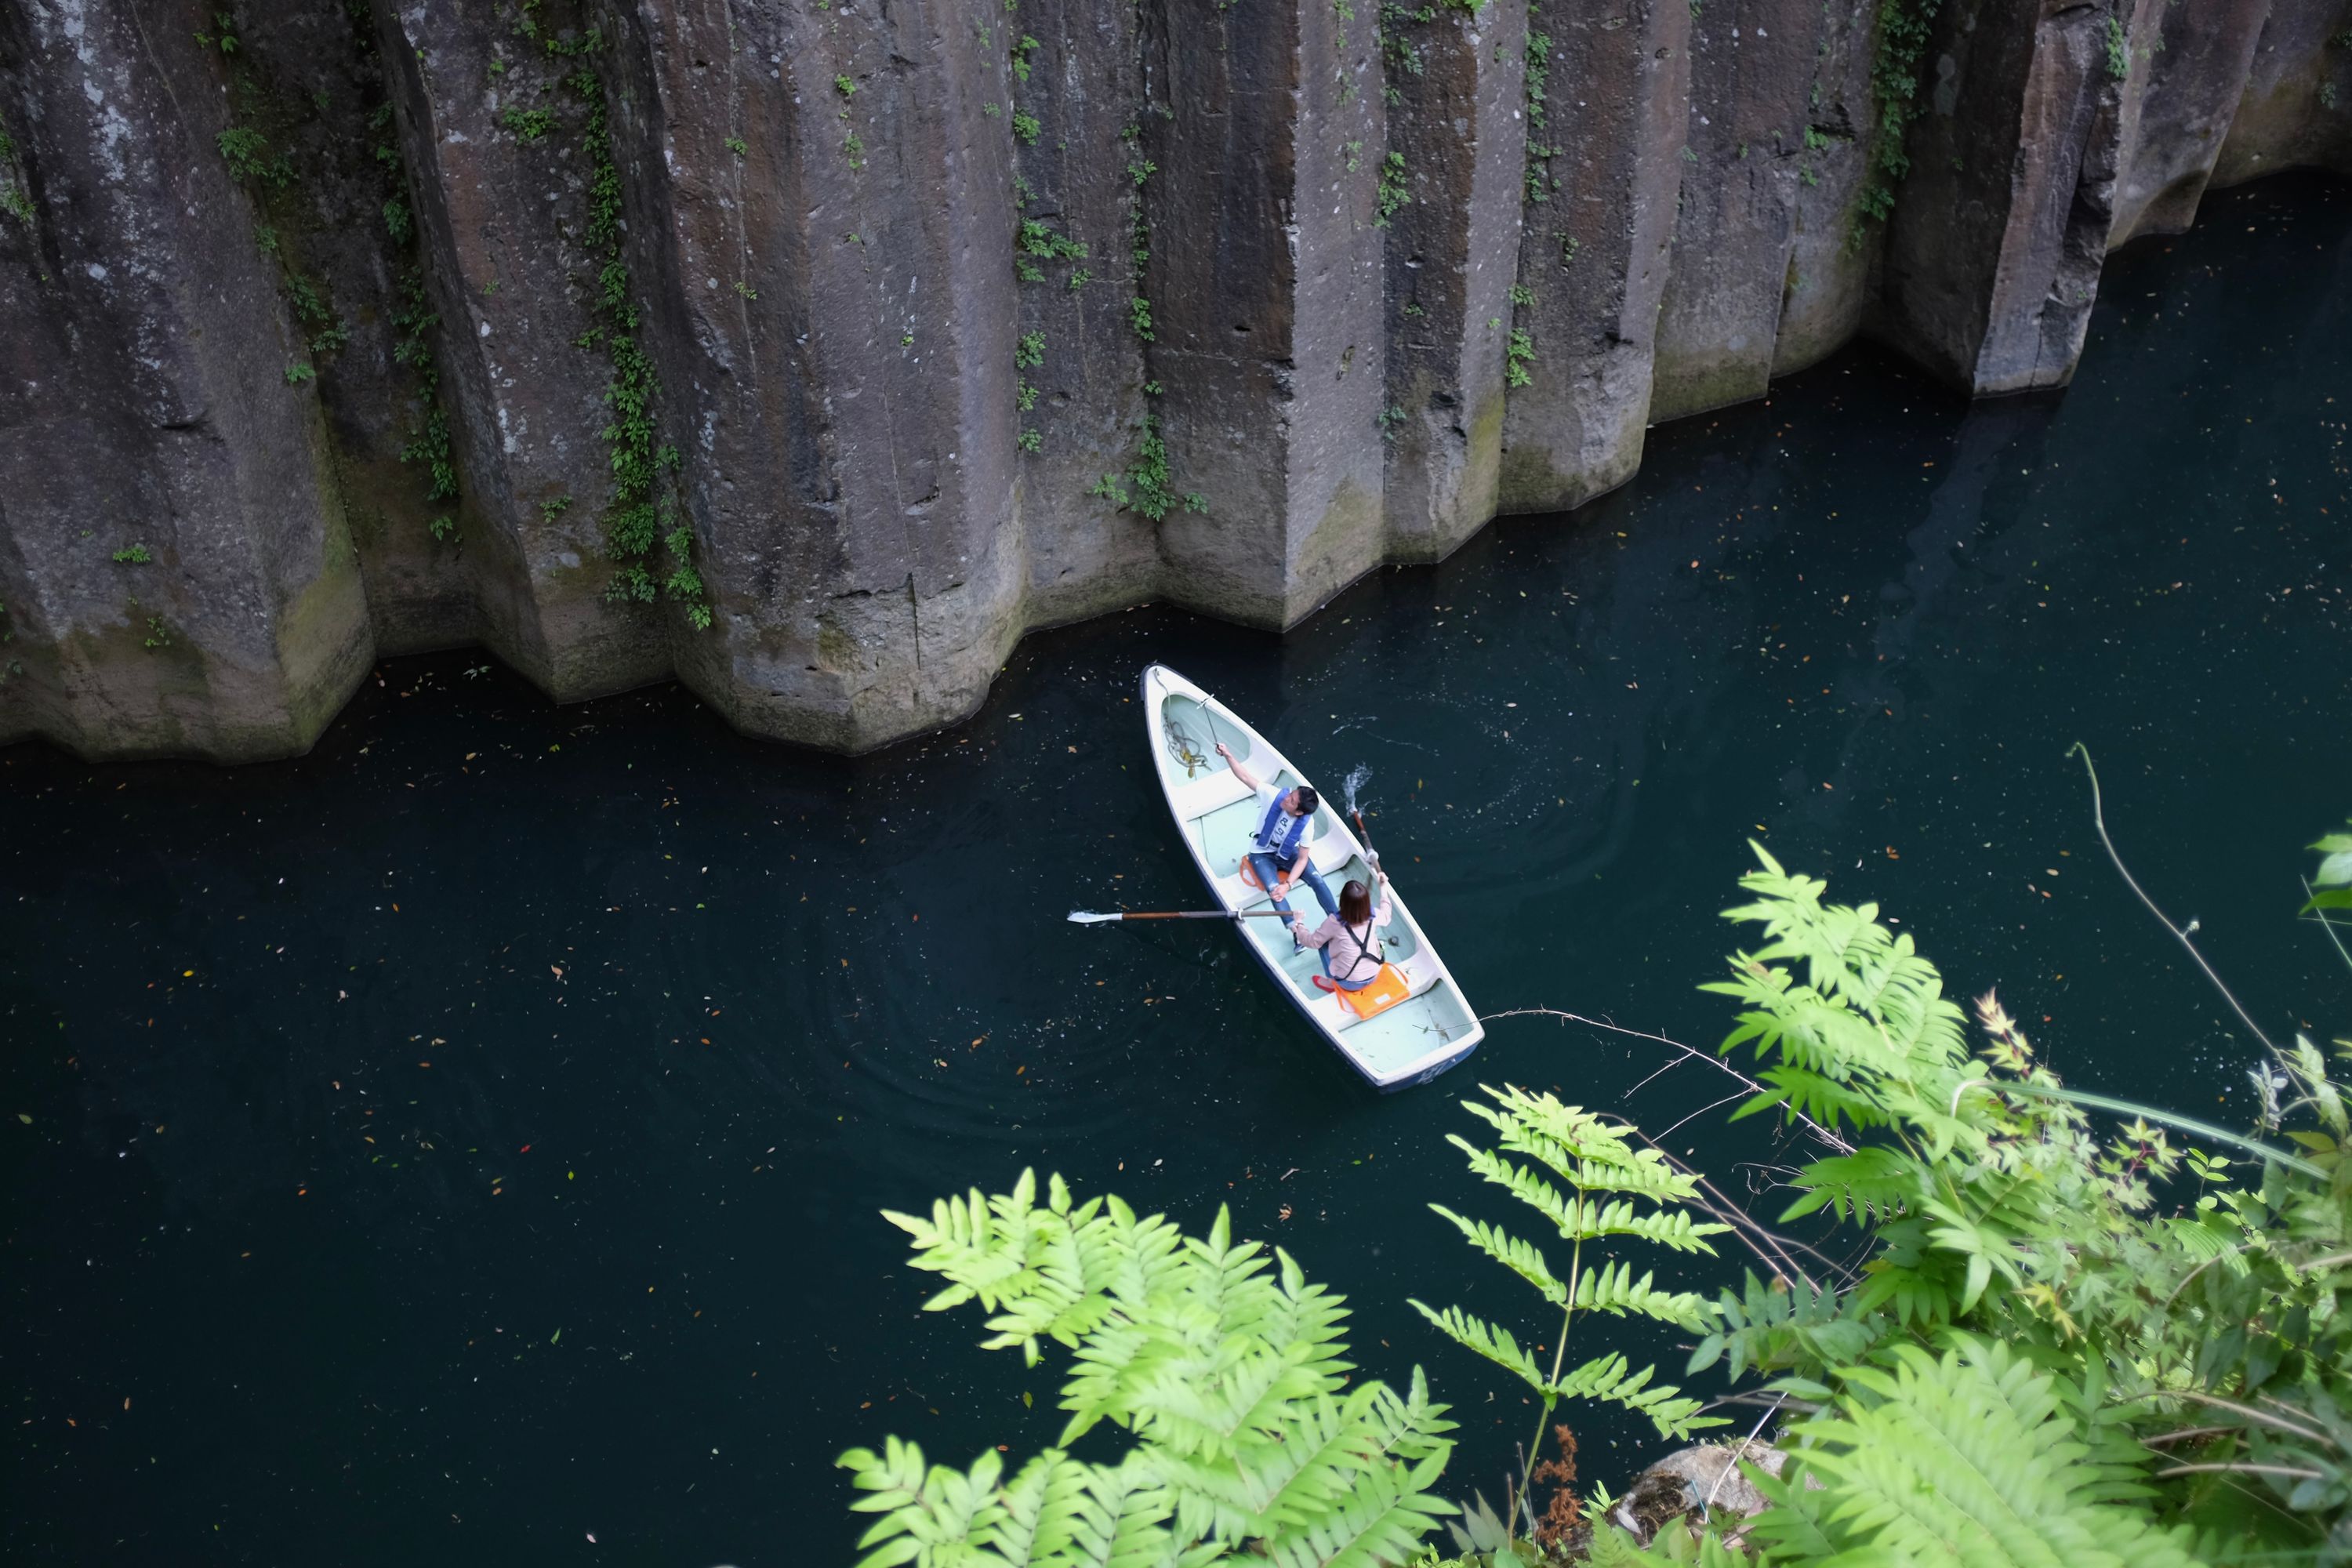 A sightseeing paddle boat in the gorge with two people in it.